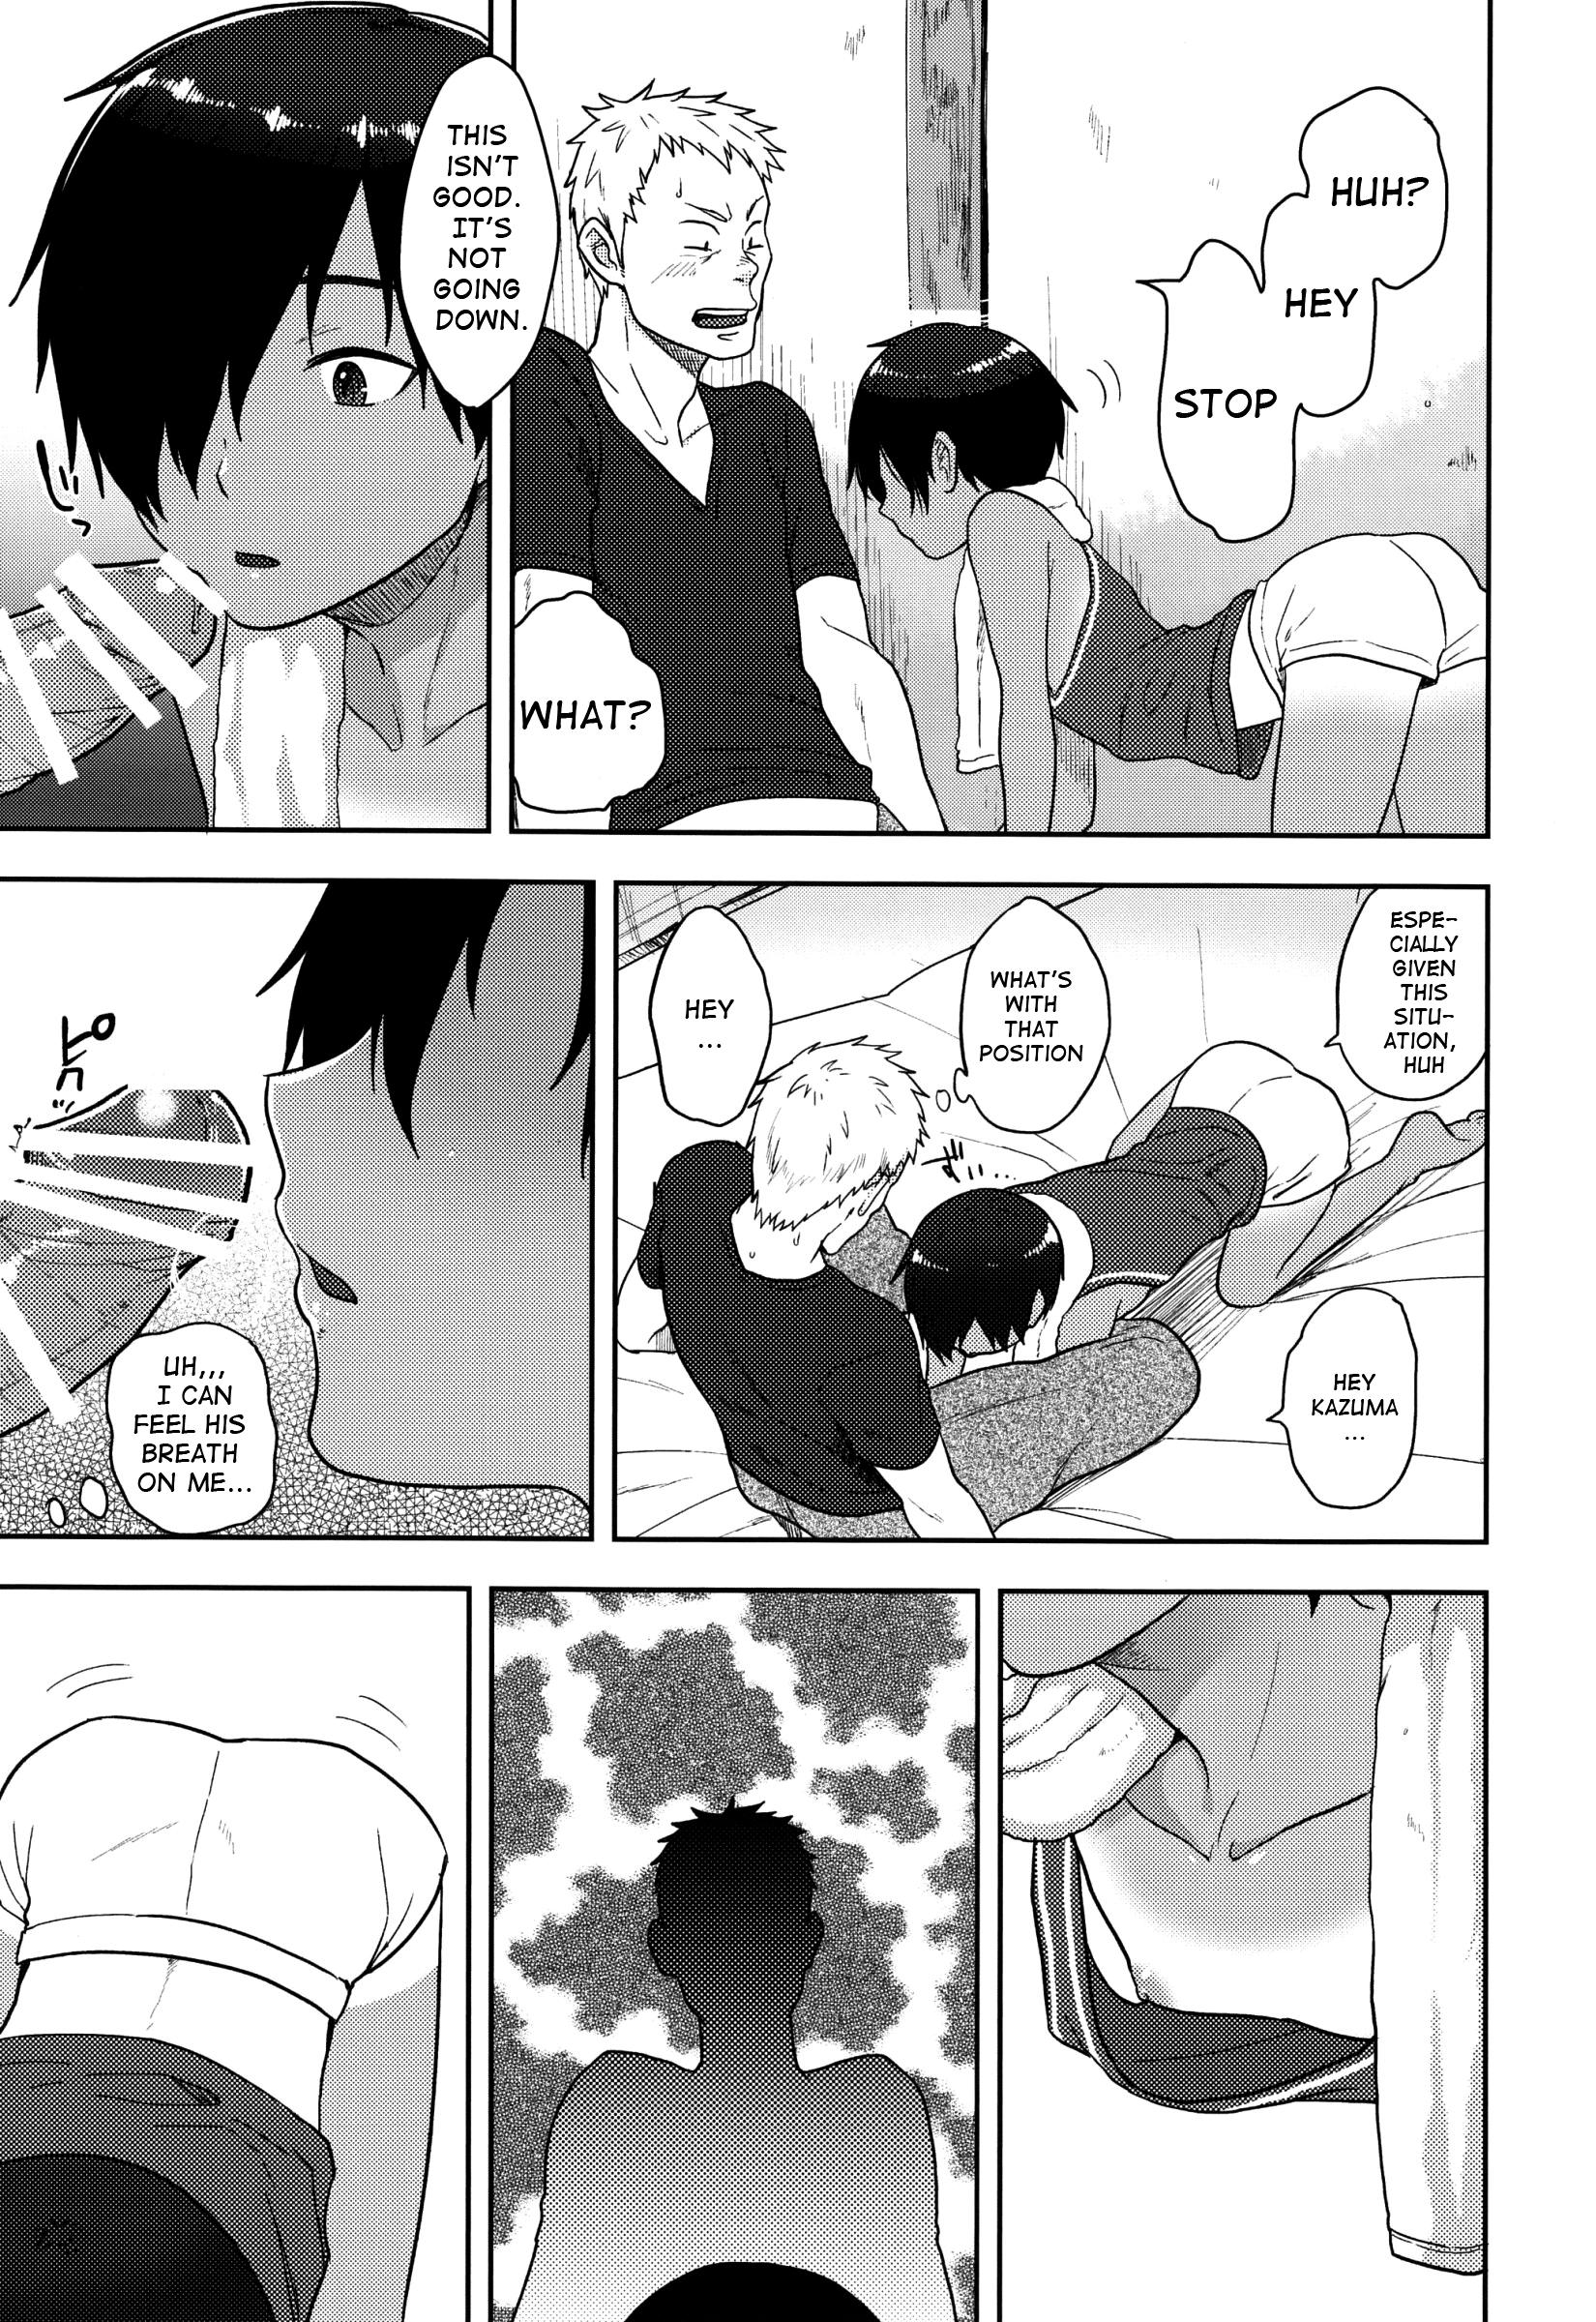 Ex Gf DKY - Summer wars Classic - Page 7